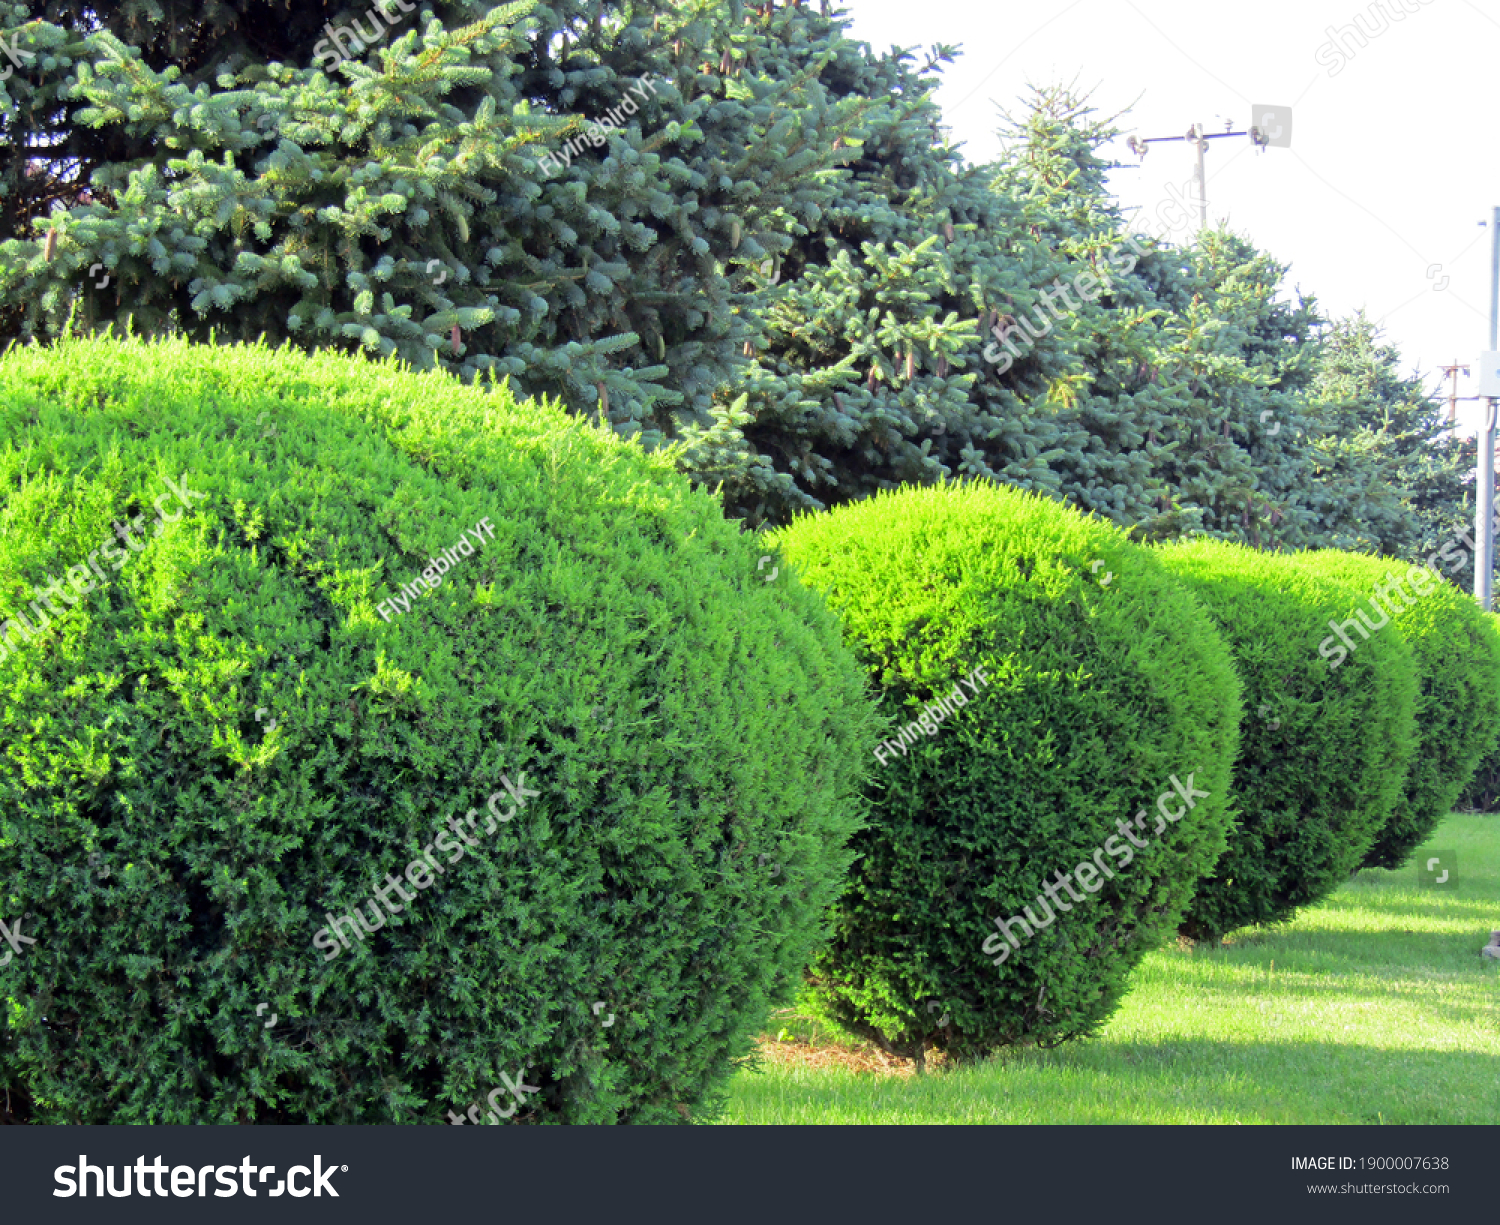 A row of spherically trimmed lush juniper shrub hedges growing on lawn in the front of a row of fir trees with a couple of power poles under sunshine in spring #1900007638